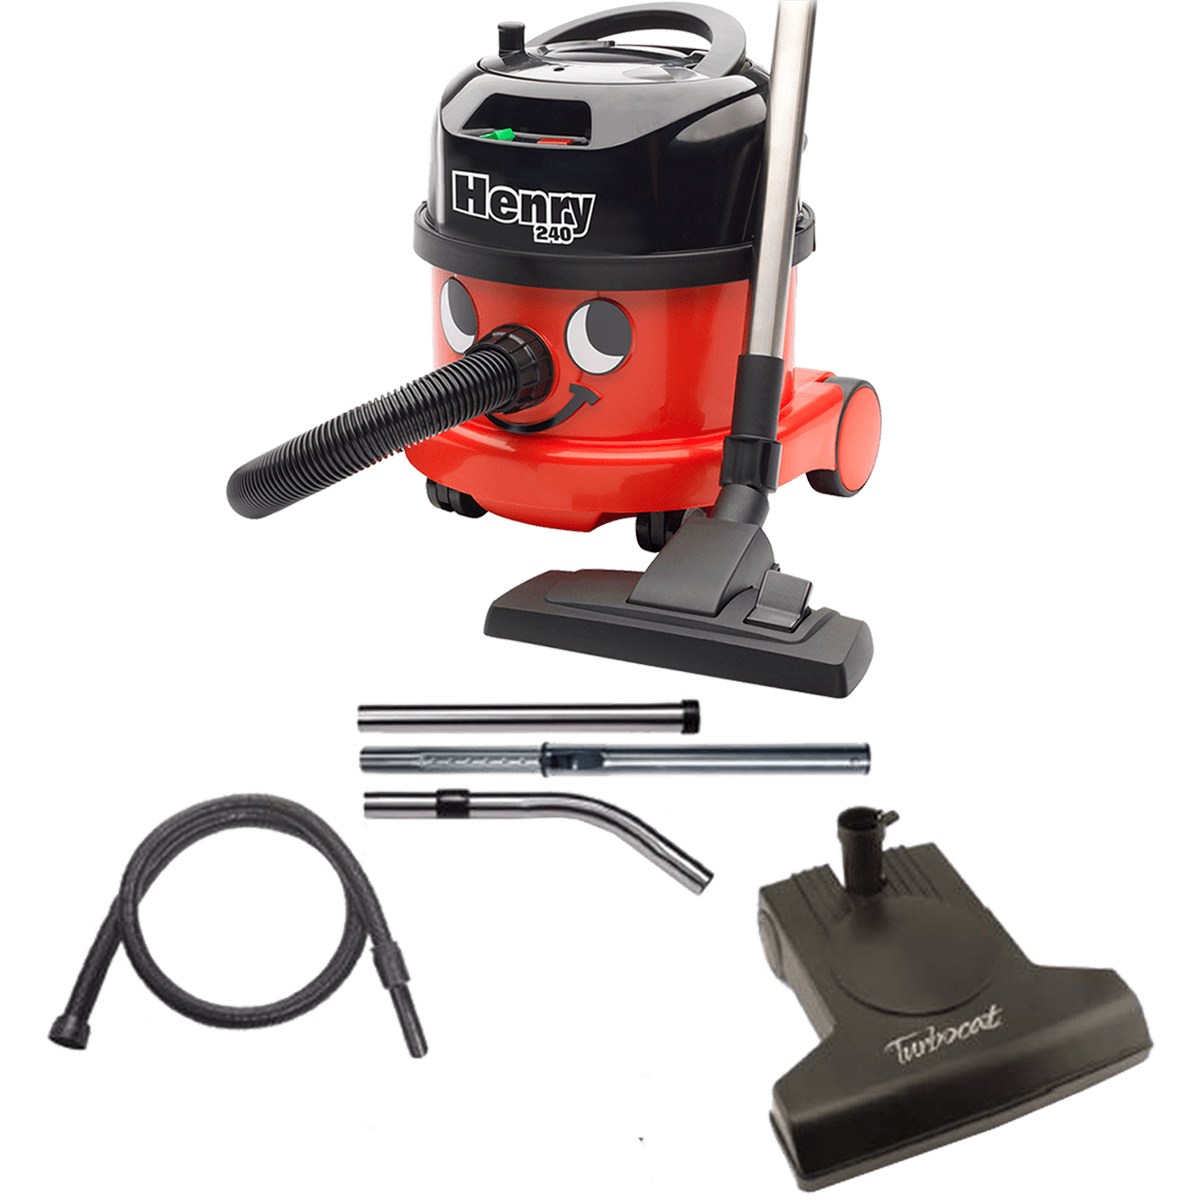 NaceCare PPR 240 with Air Driven Power Head - AST3 Canister Vacuum Cleaner